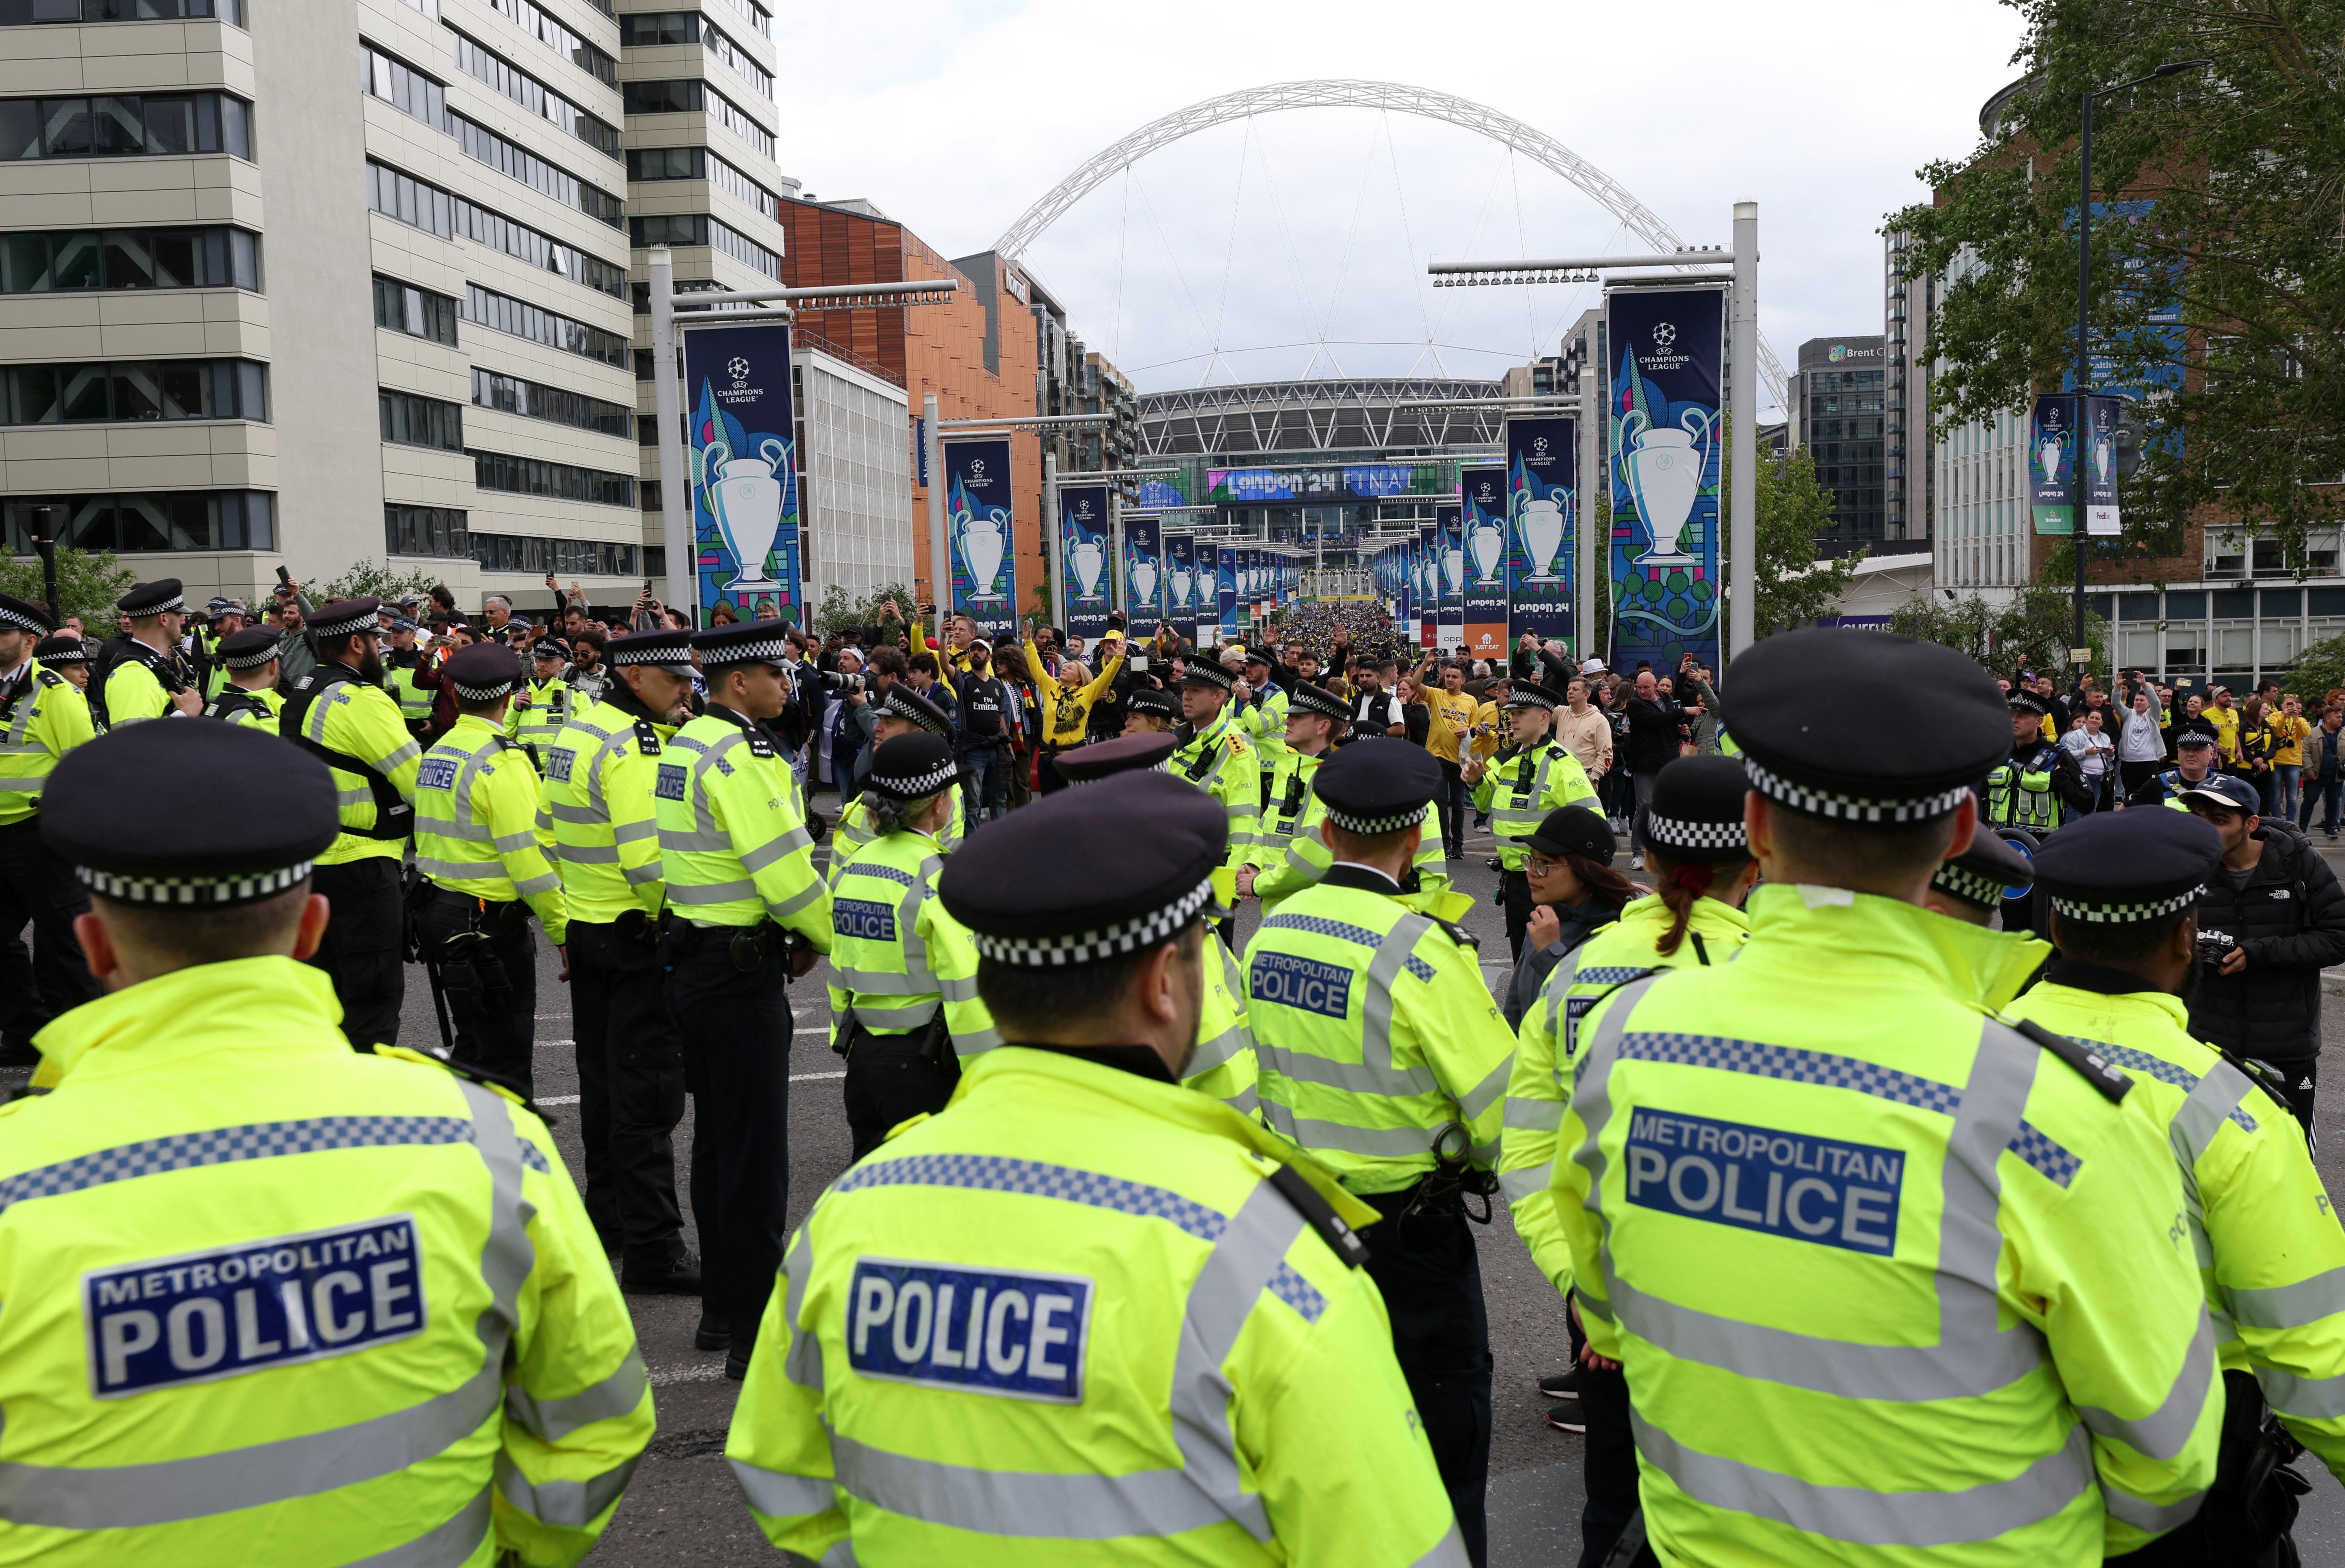 Police made 53 arrests around the Champions League final at Wembley